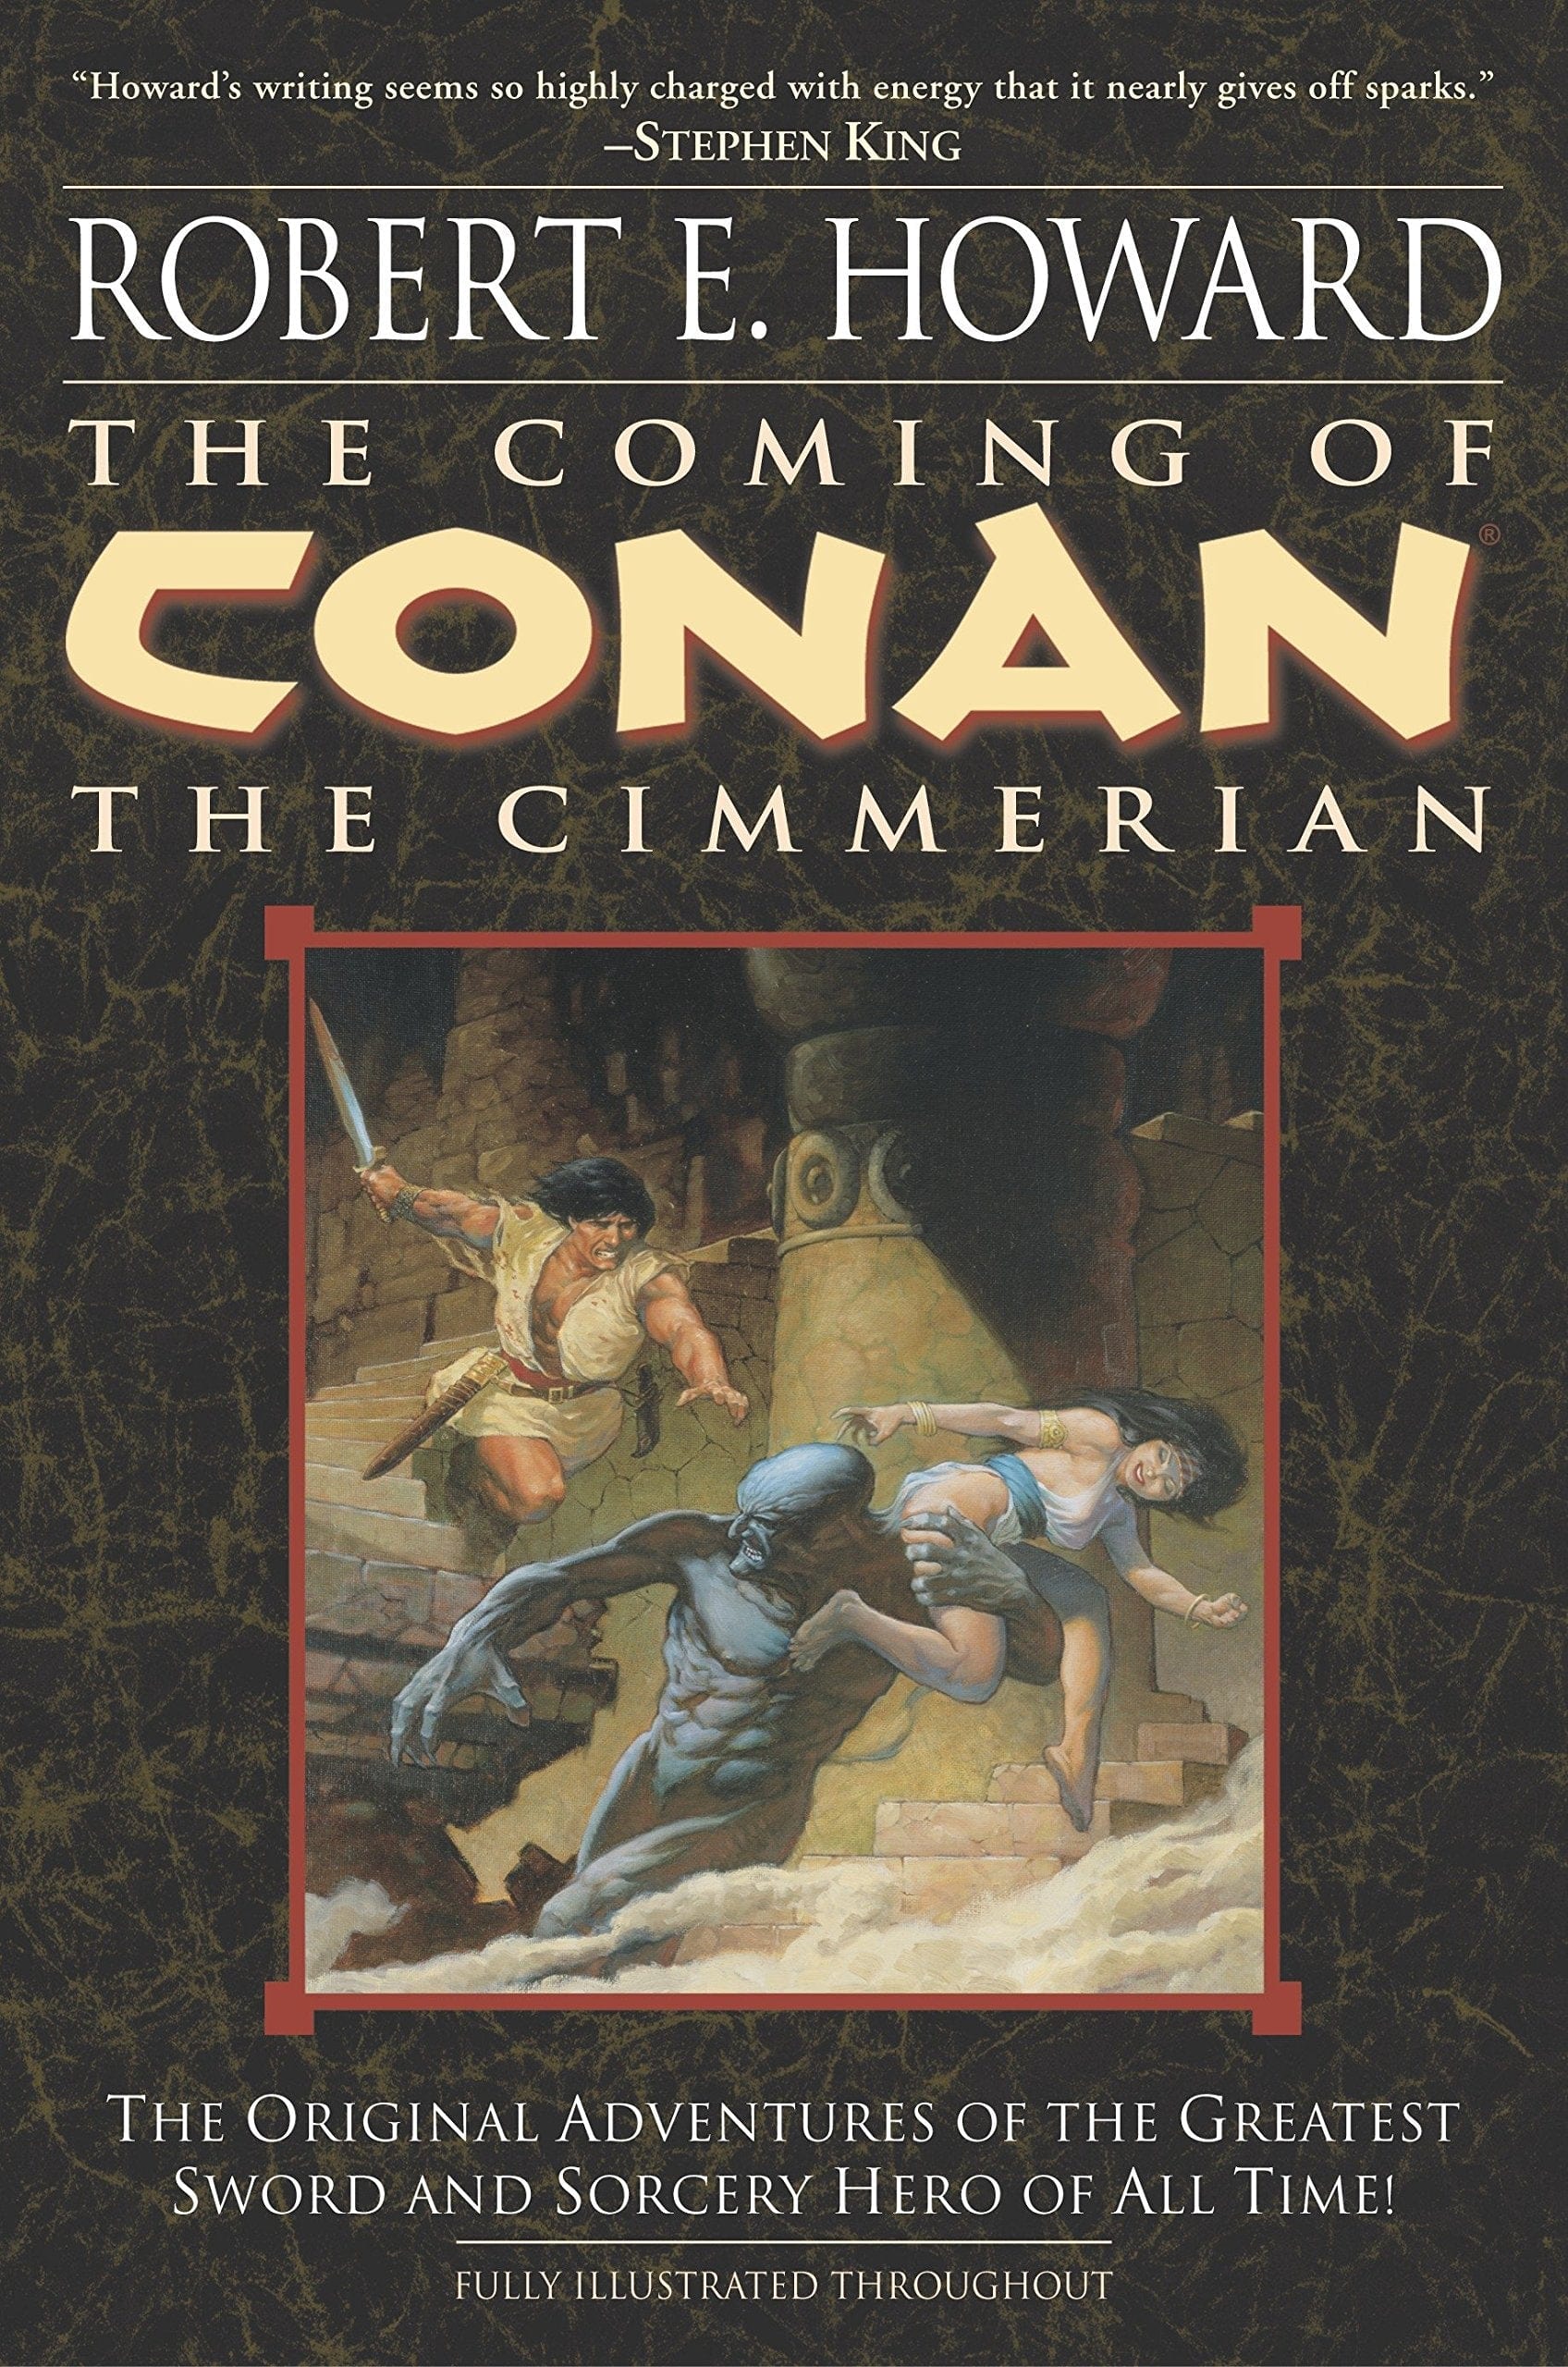 Coming of Conon the Cimmerian: The Original Adventures of the Greatest Sword and Sorcery Hero of All Time! - Third Eye